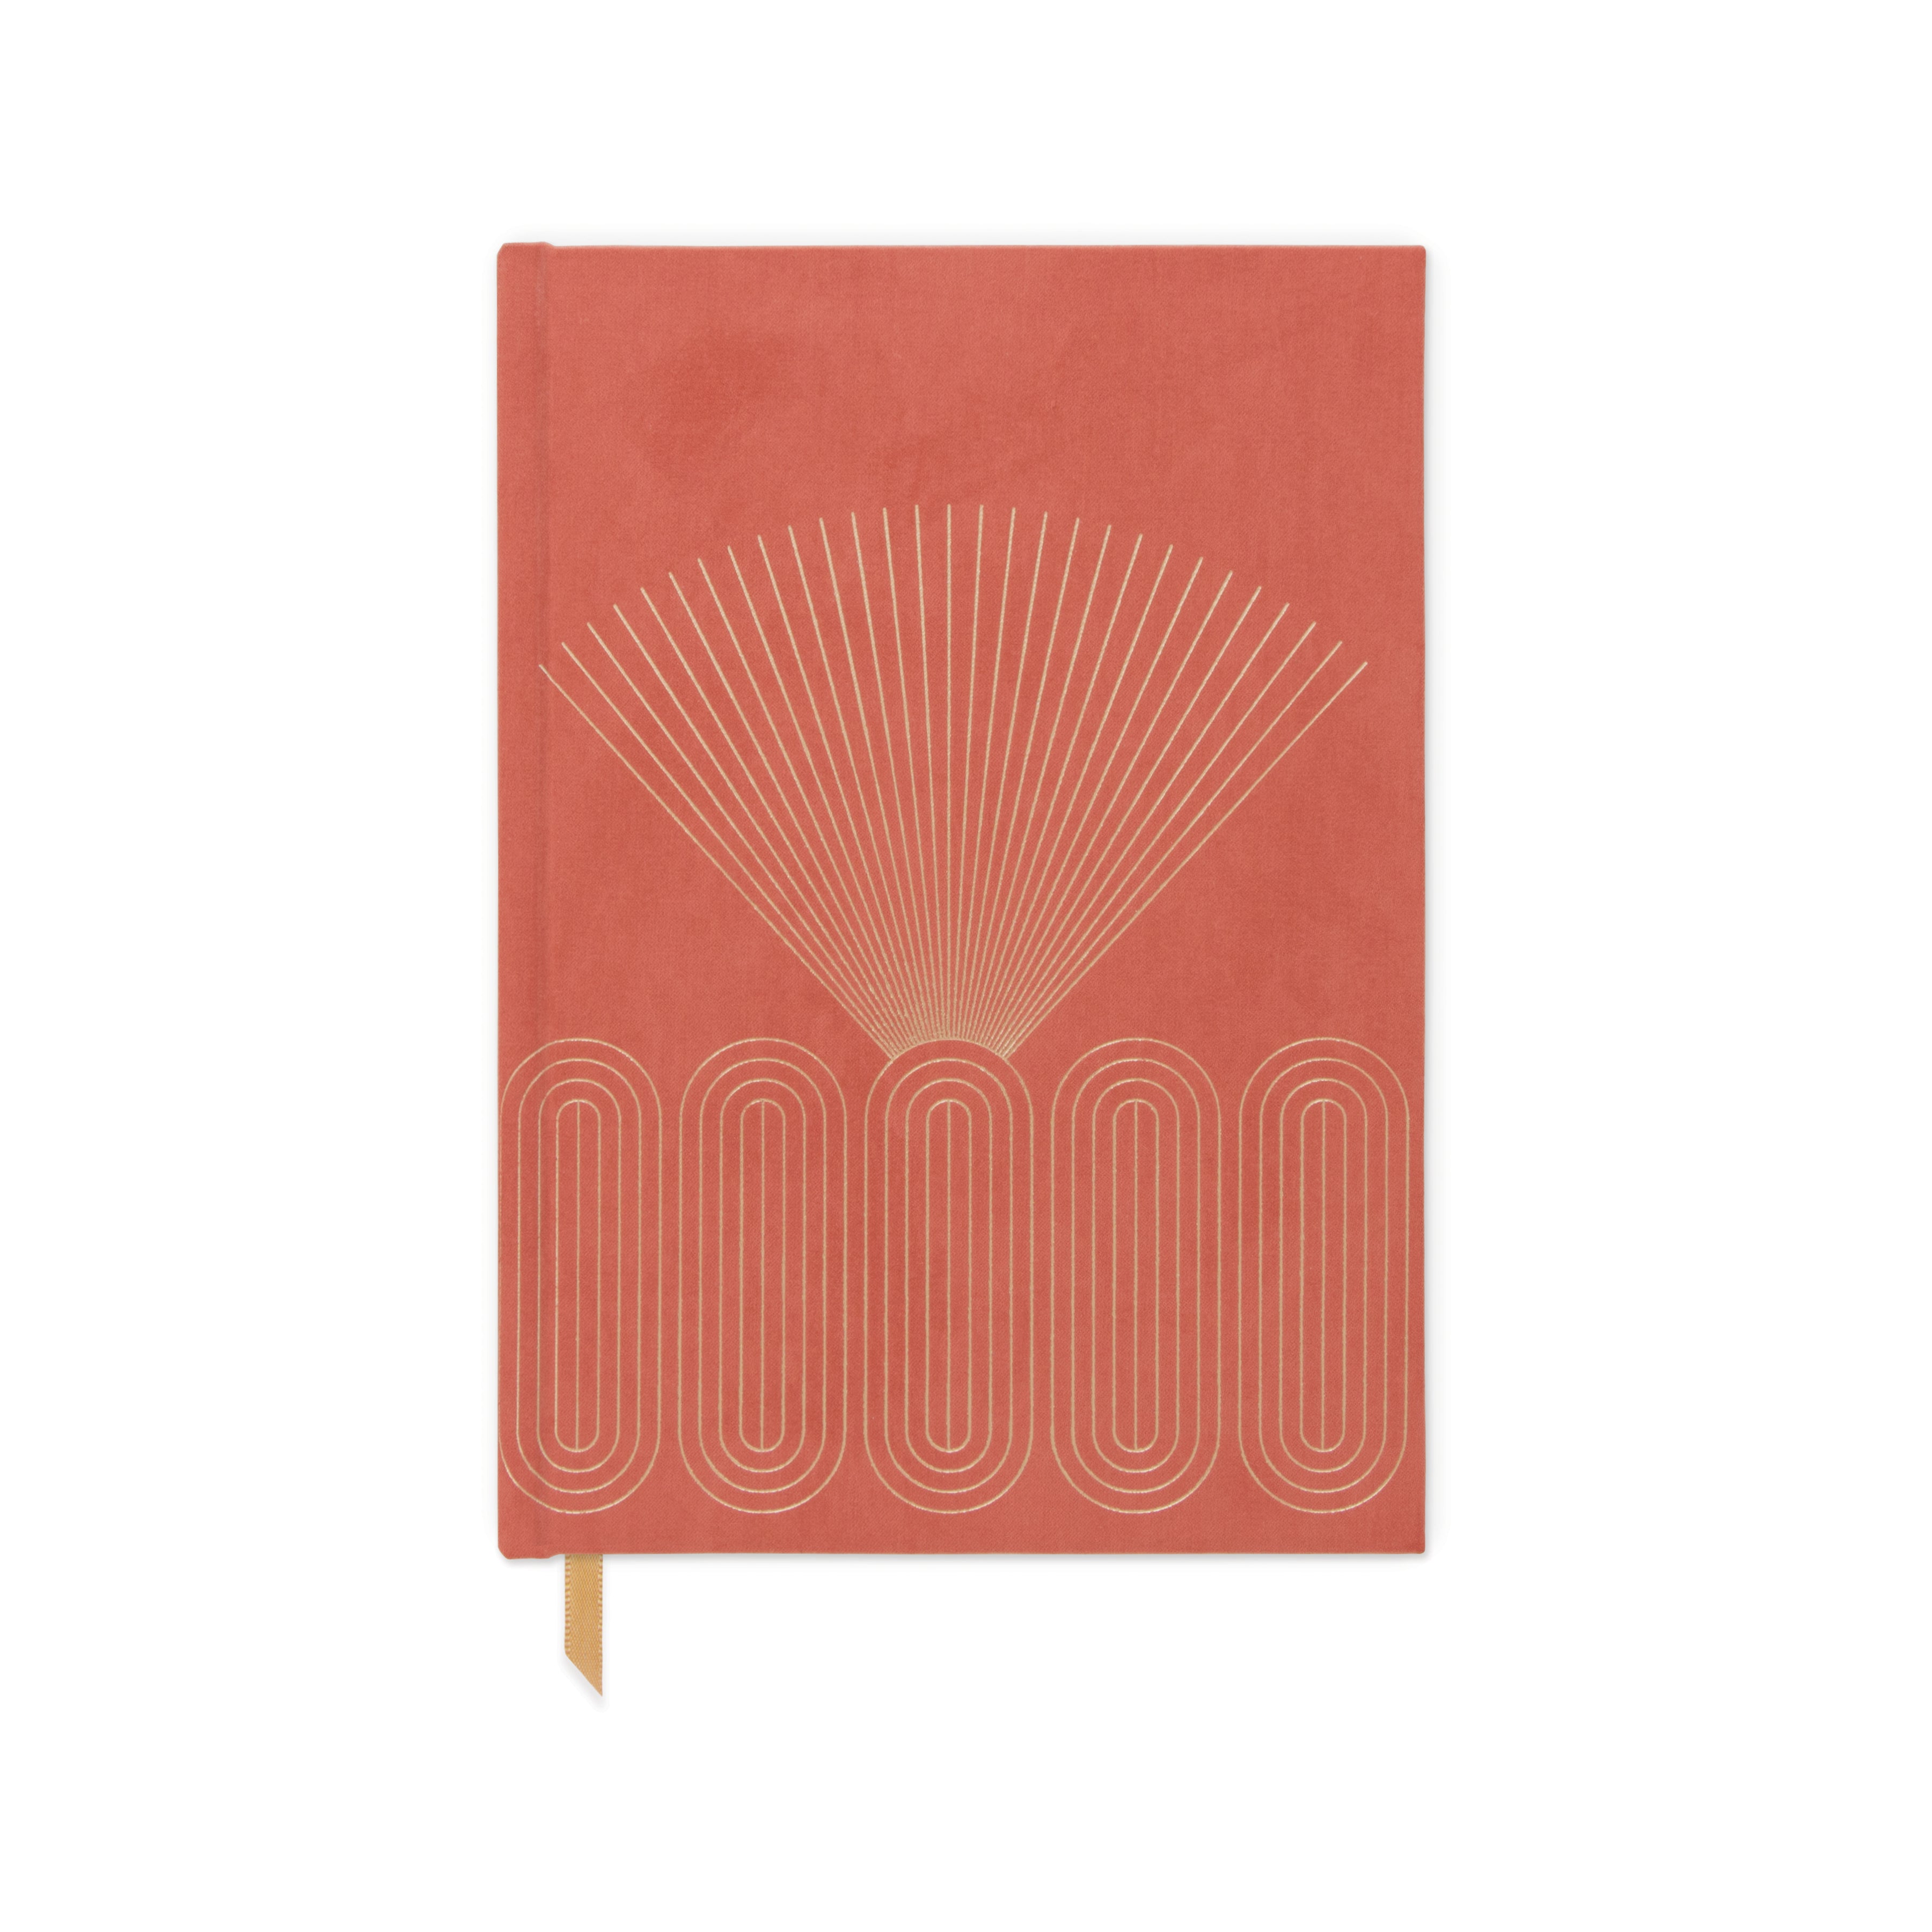 Orangey red Radiant Rays Hard Cover Suede Cloth Journal with pocket, gold geometric design and gold ribbon bookmark. White background. 